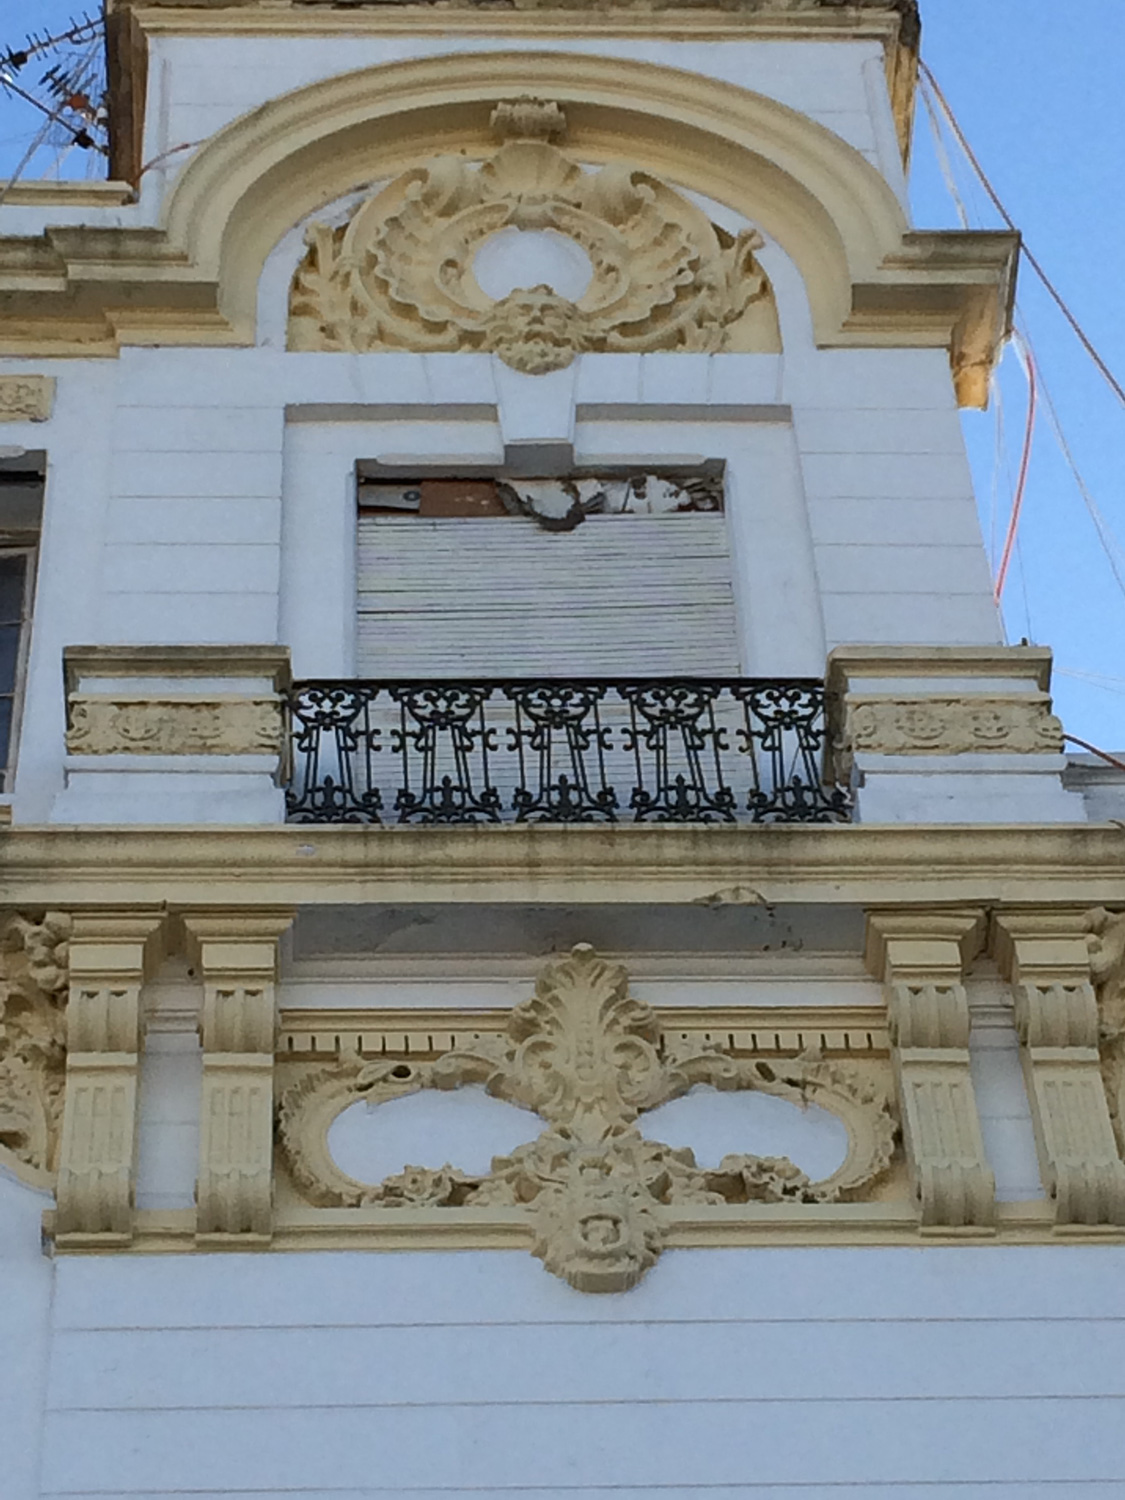 Detail view of the decorations on the window at the top of the northeast corner of the facade